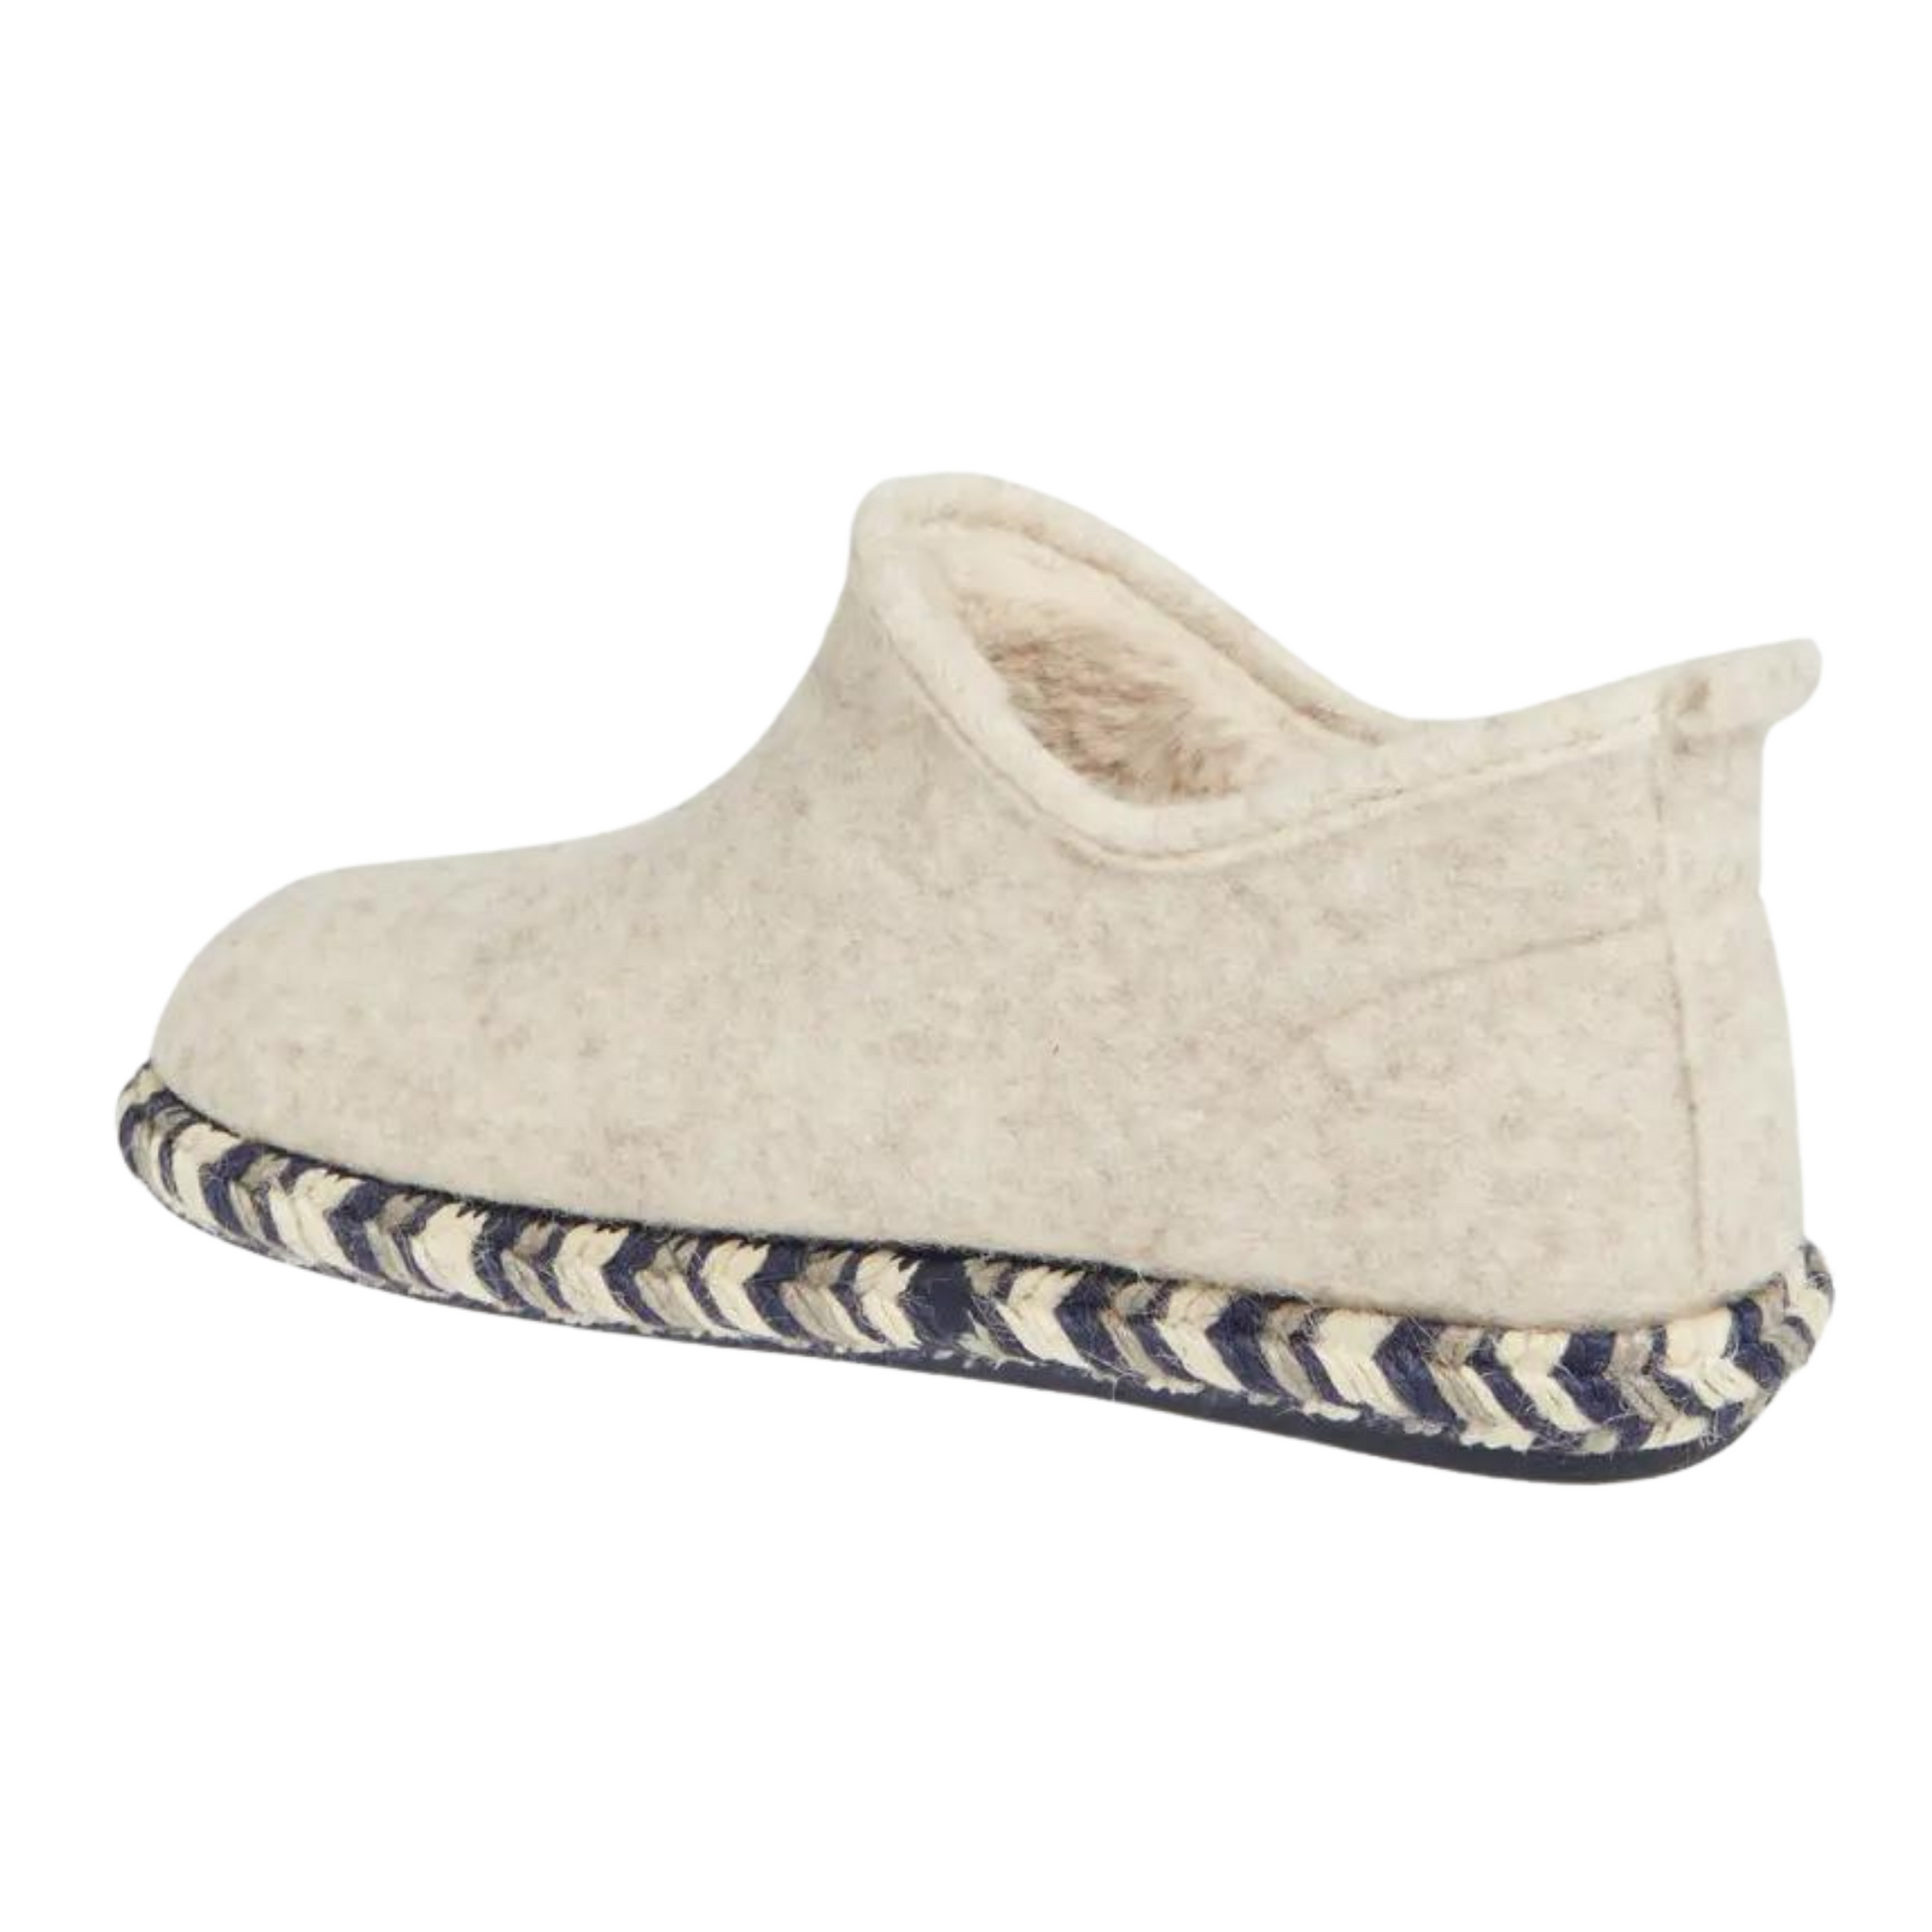 The back angle of the cream slipper shows the inner fir lining, and is complimented by the chevron stitch at the sole.